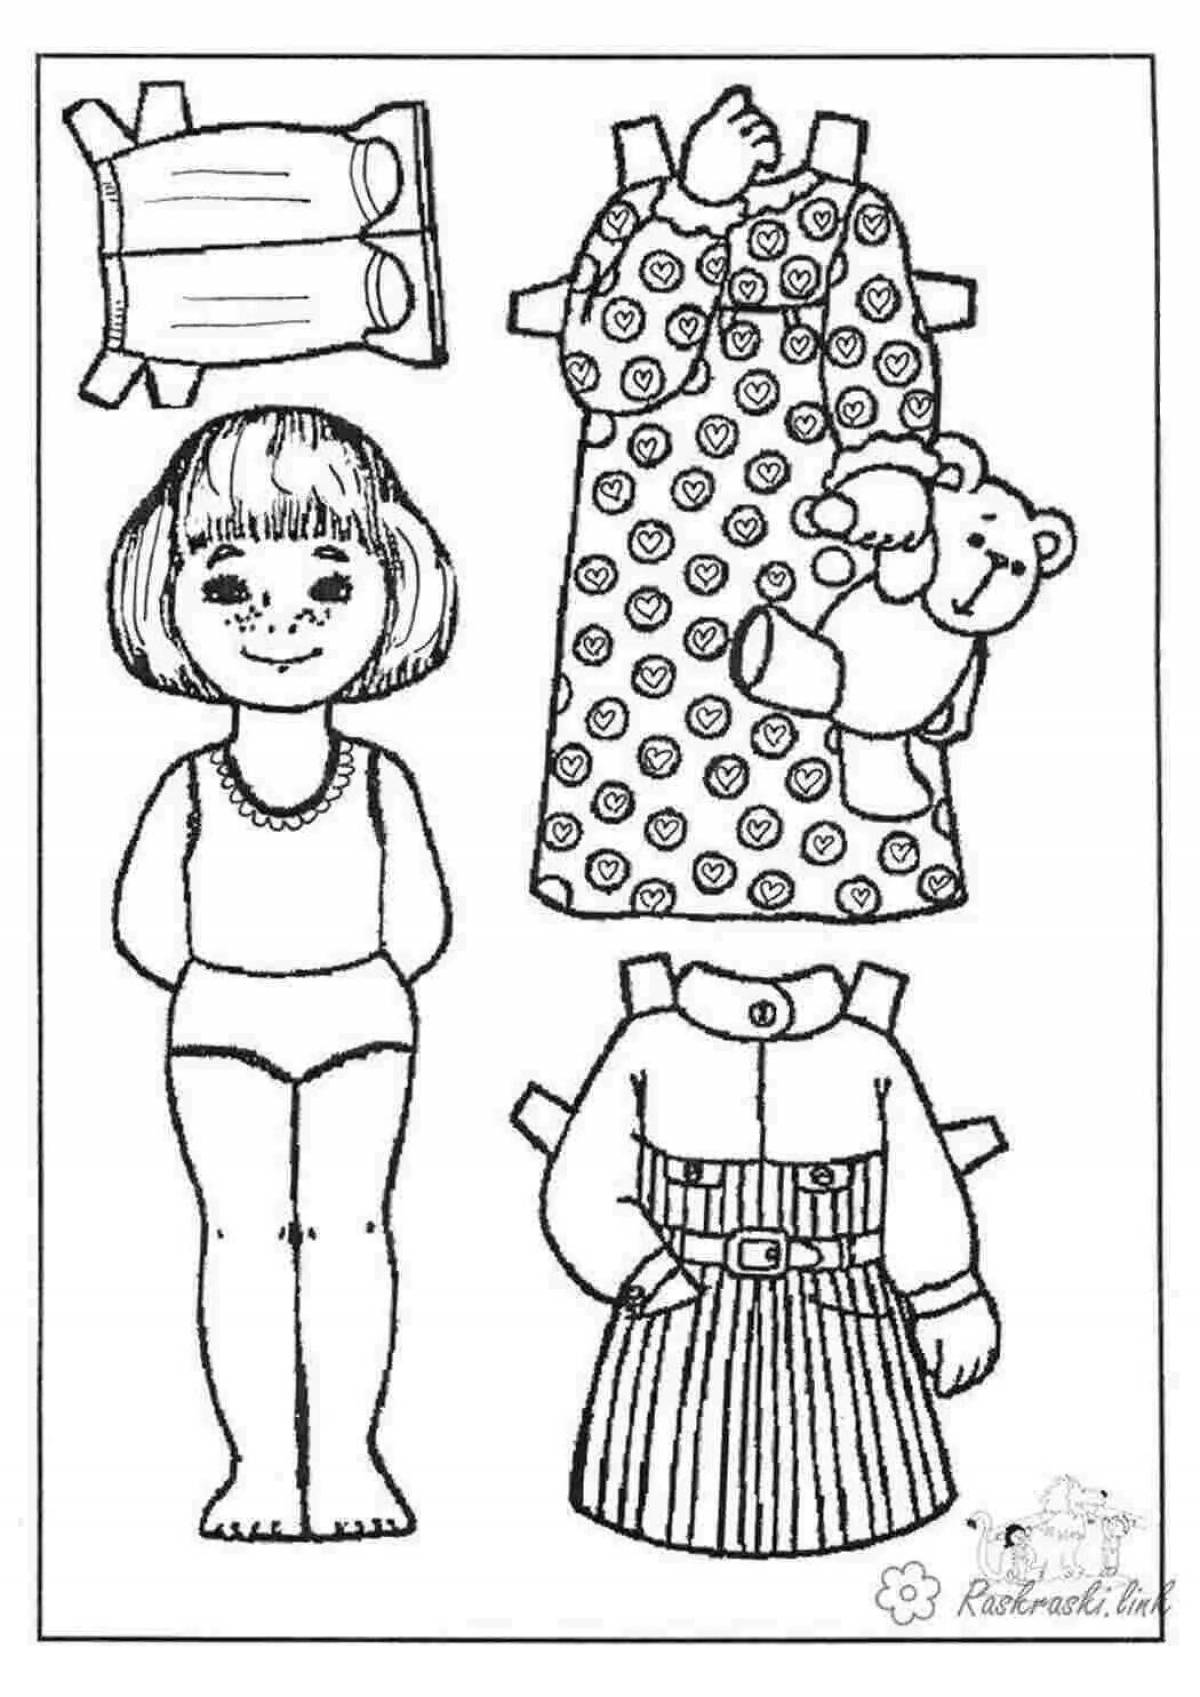 Colored doll-coloring book for children 6-7 years old